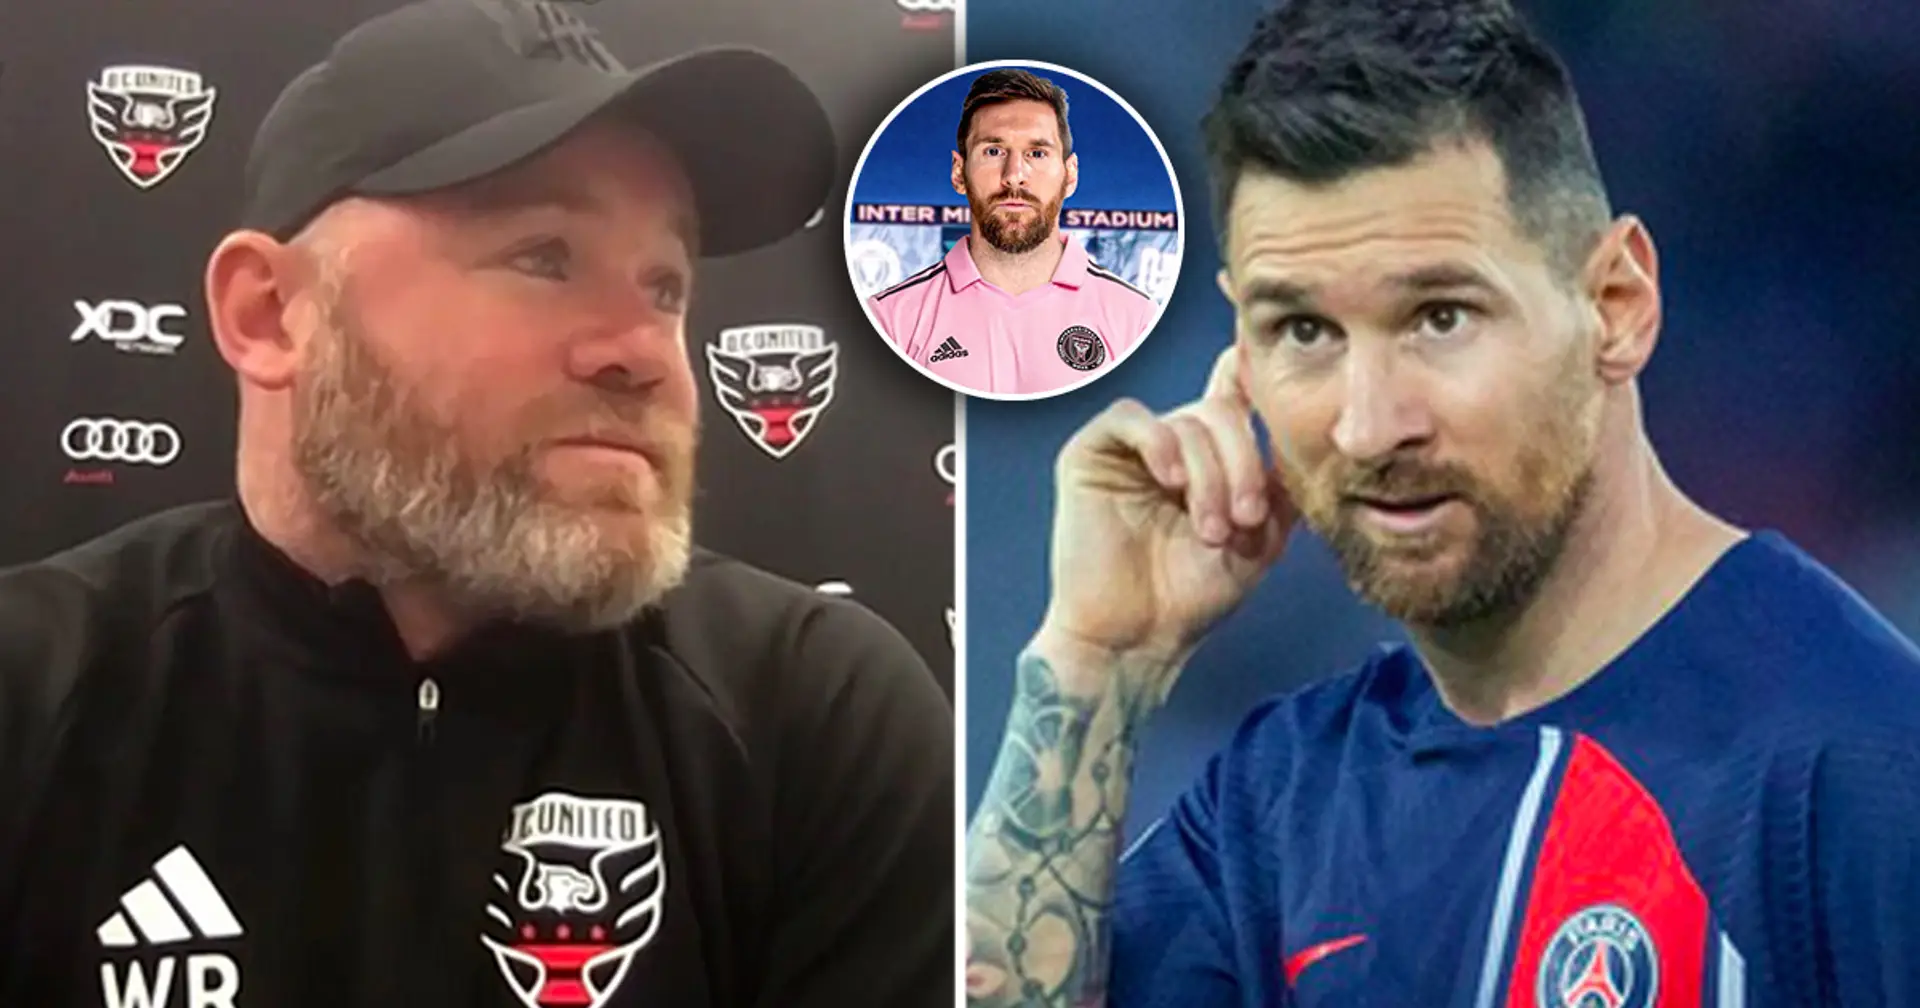 Wayne Rooney reacts to Leo Messi's transfer to MLS